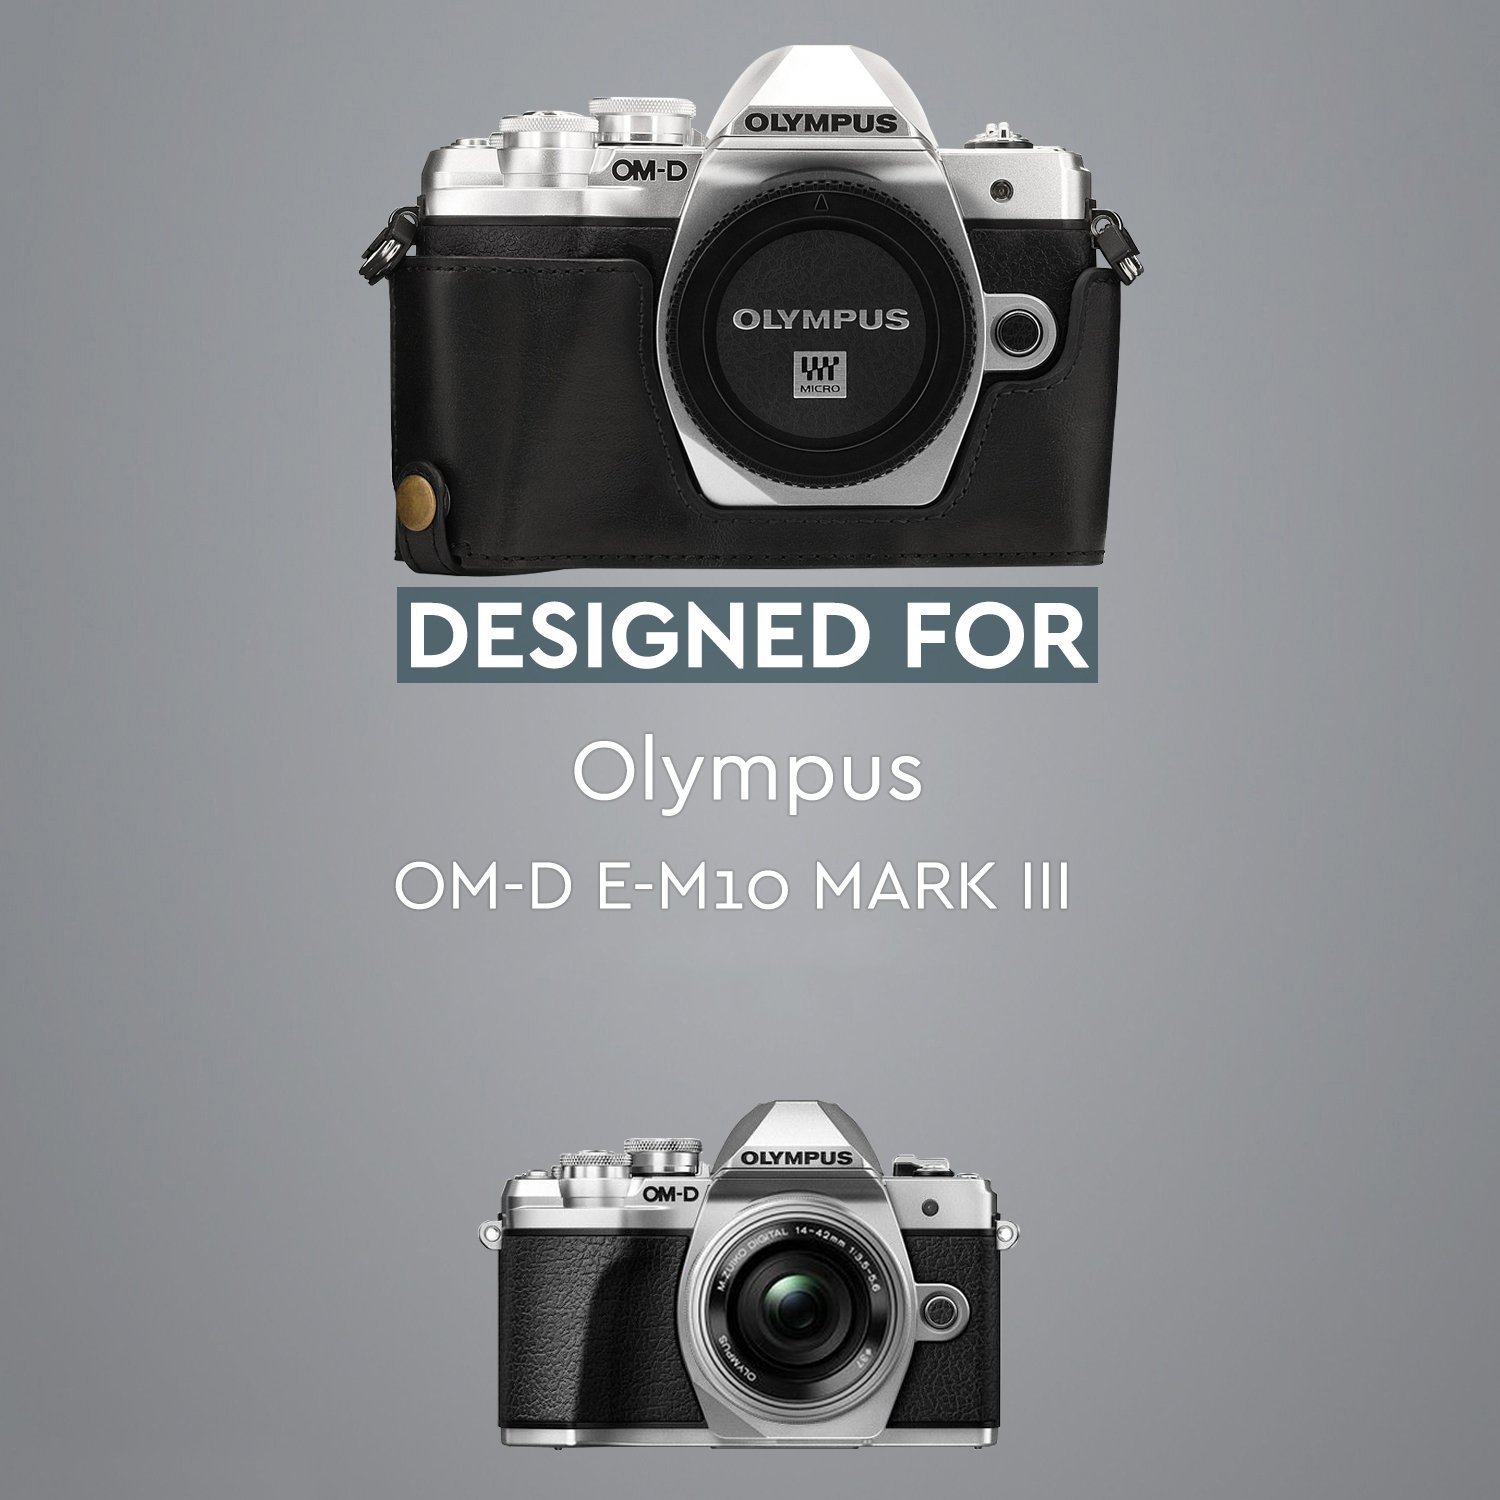 MegaGear Olympus OM-D E-M10 Mark III Ever Ready Leather Camera Half Case and Strap, with Battery Access - Black - MG1350